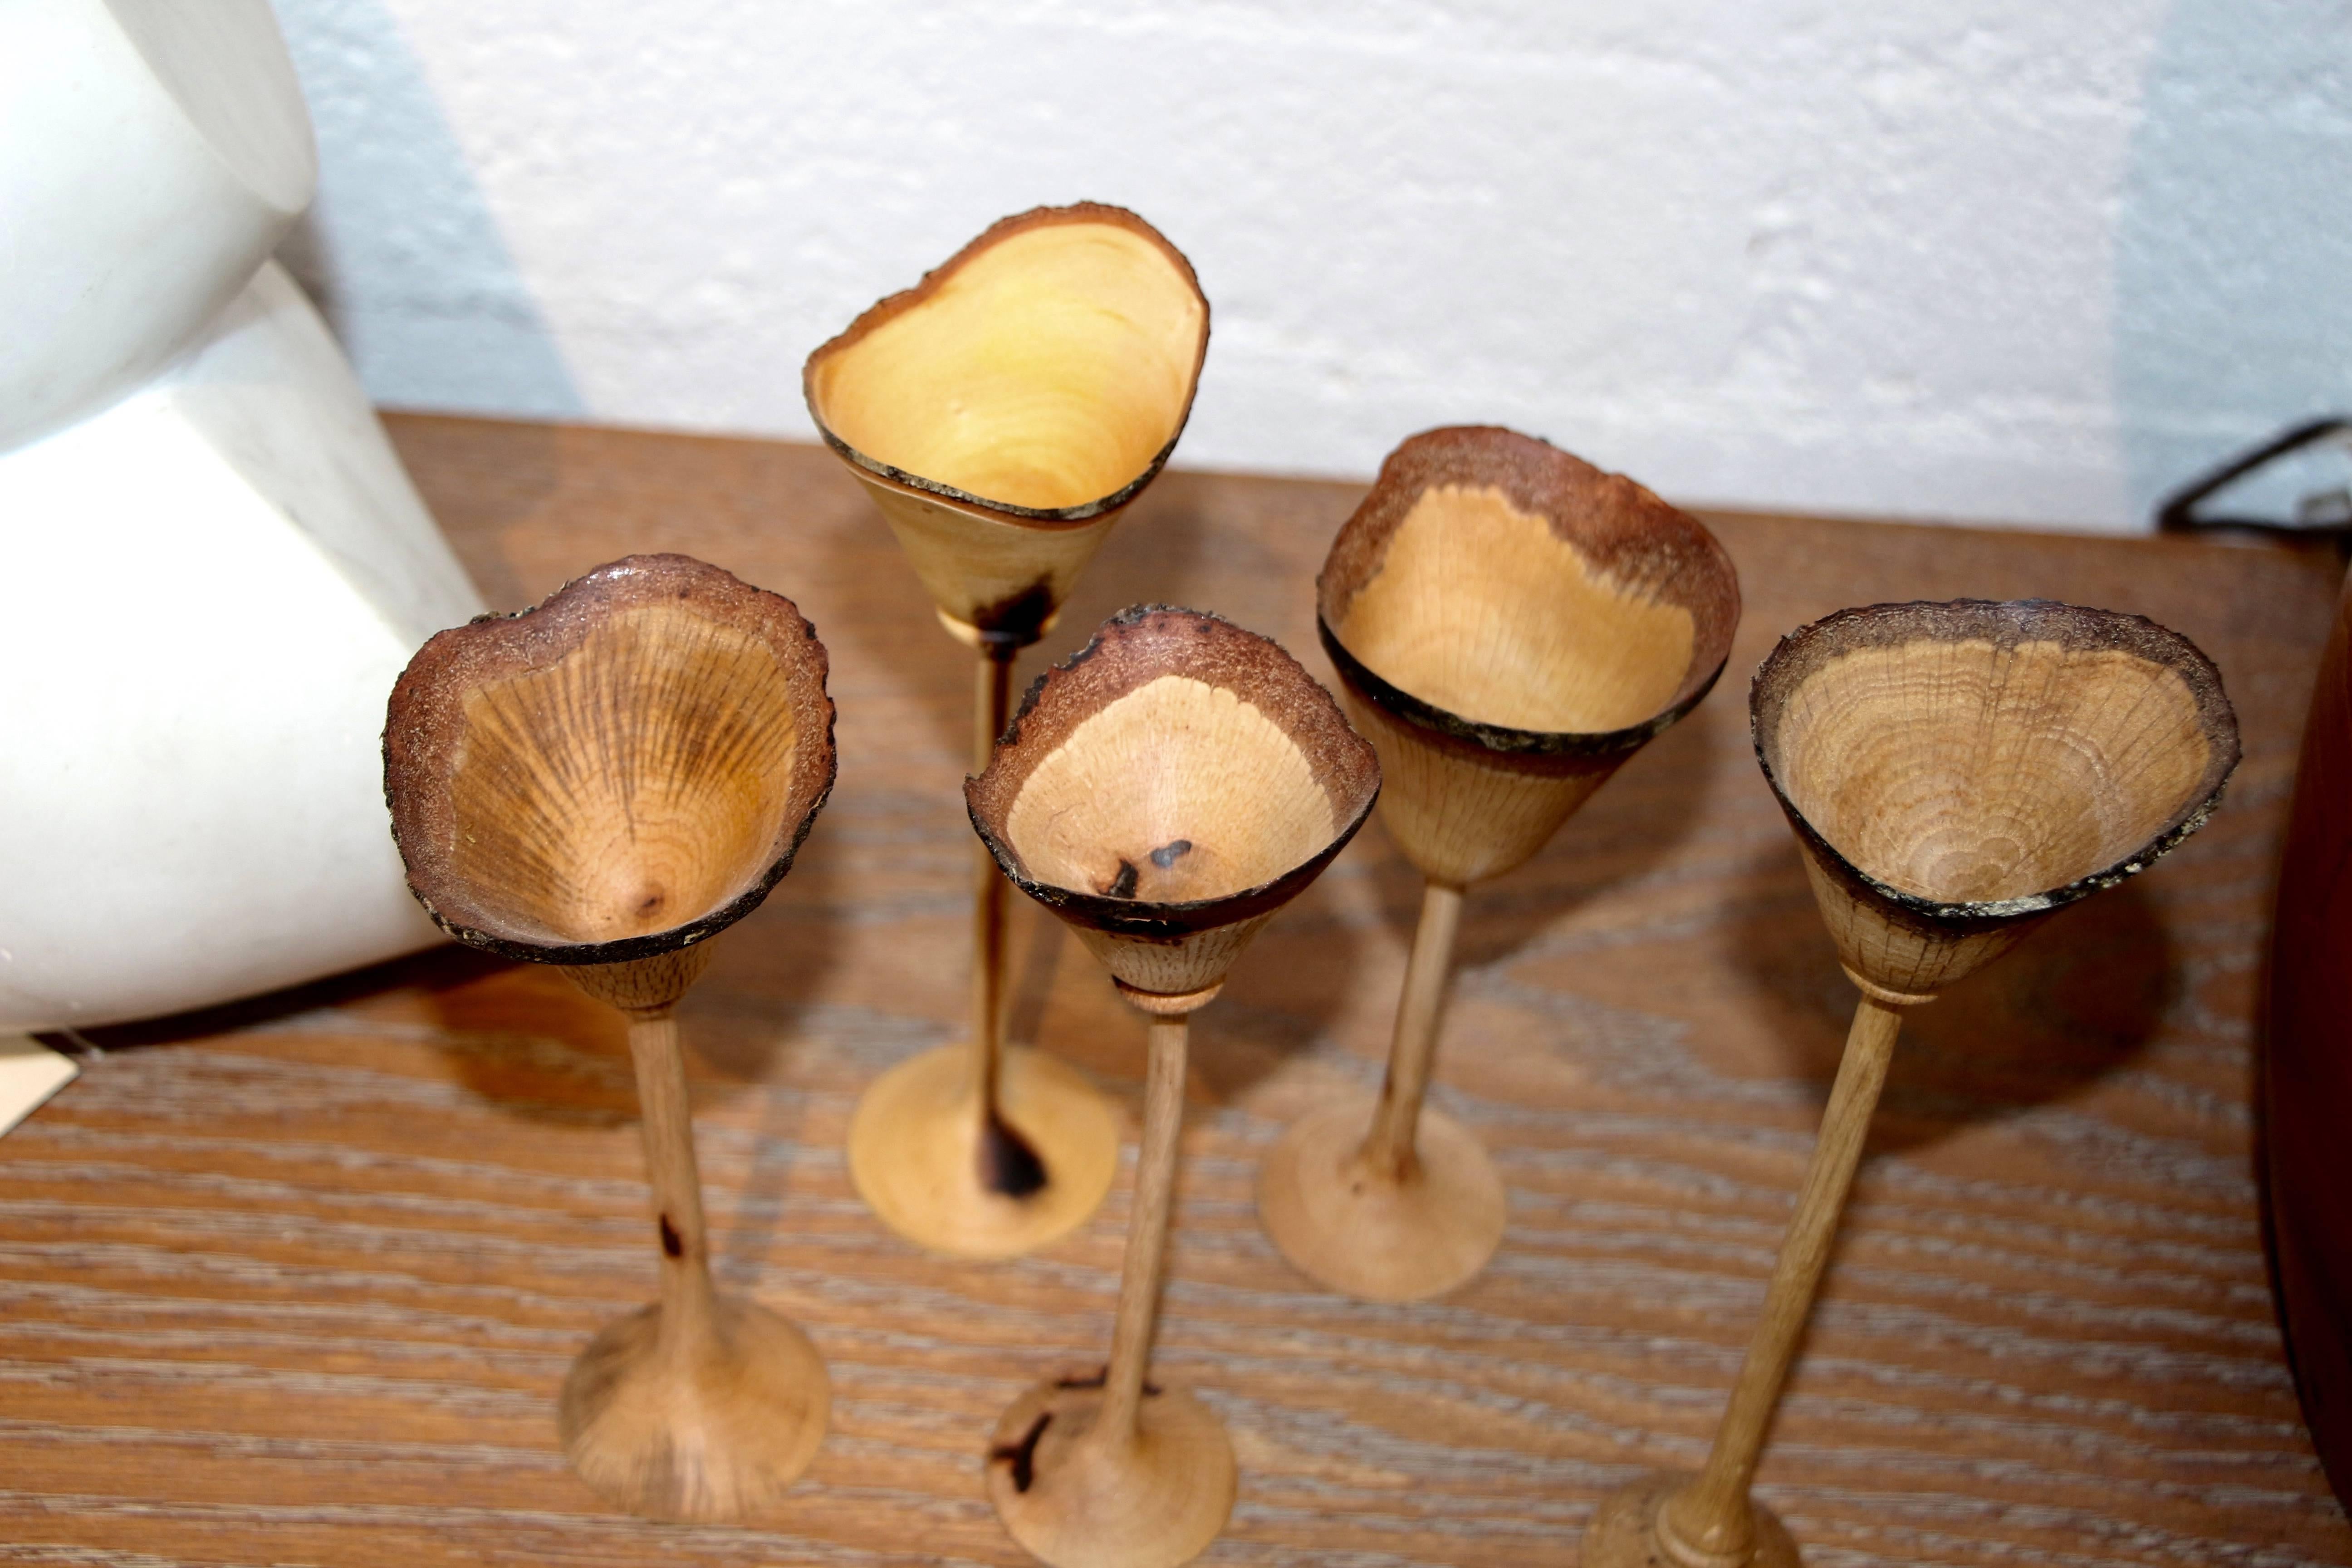 An exquisite set of six cups hand-turned by the noted northern California wood worker Paul Maurer. The tallest cup is approx 8.5 inches and the smallest is approx 6 inches tall. There diameter is approx 2.75 inches at the widest point.